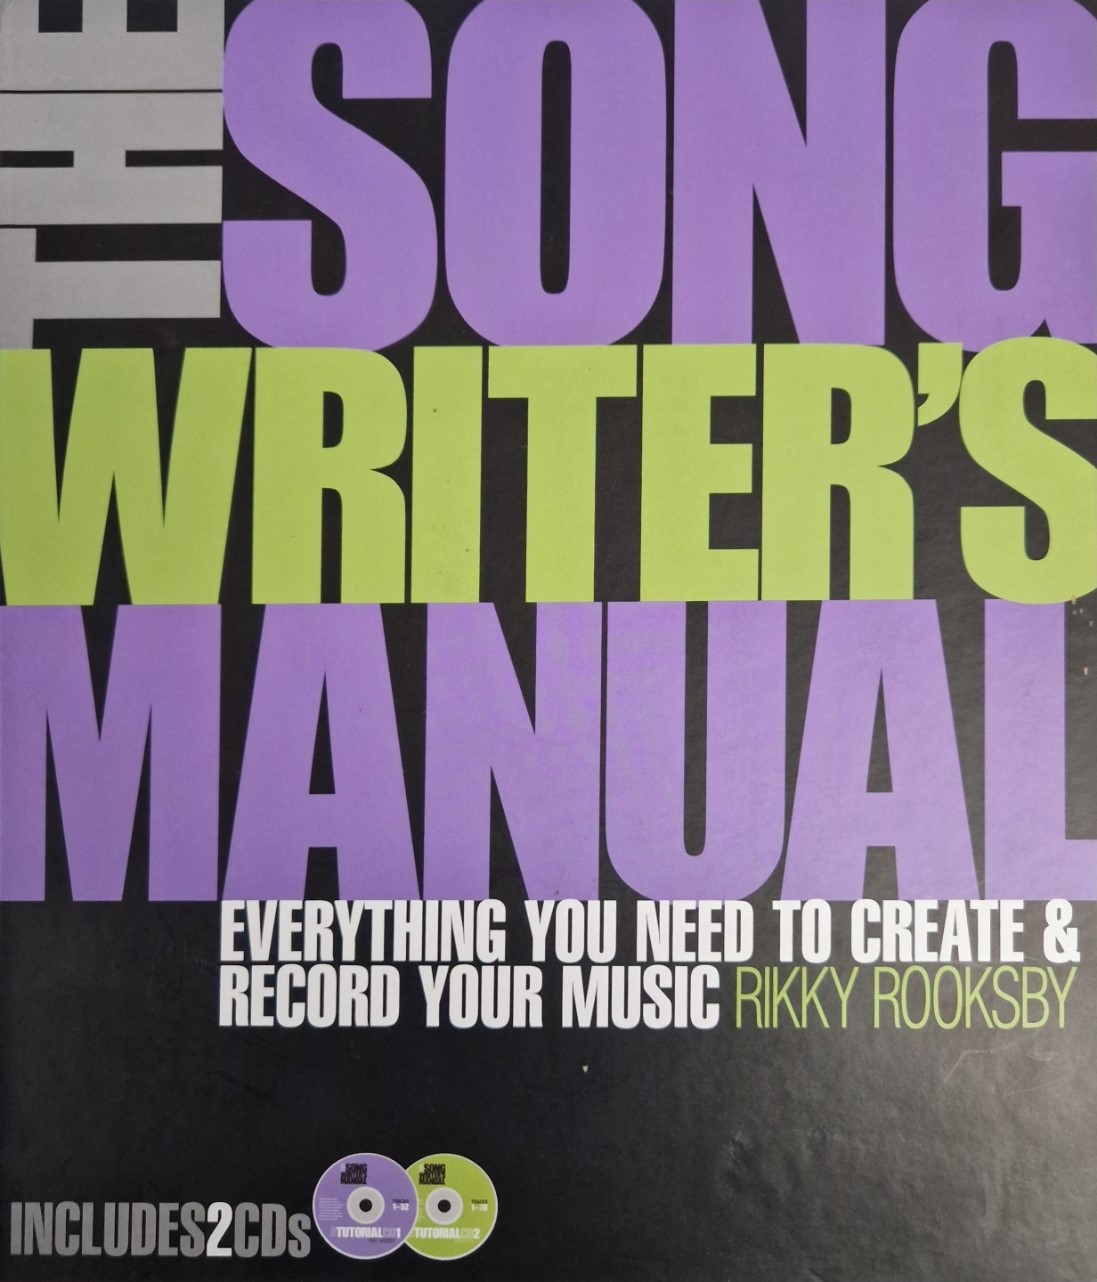 The Songwriter's Manual: Everything You Need to Create and Record Your Music (Book & CD)